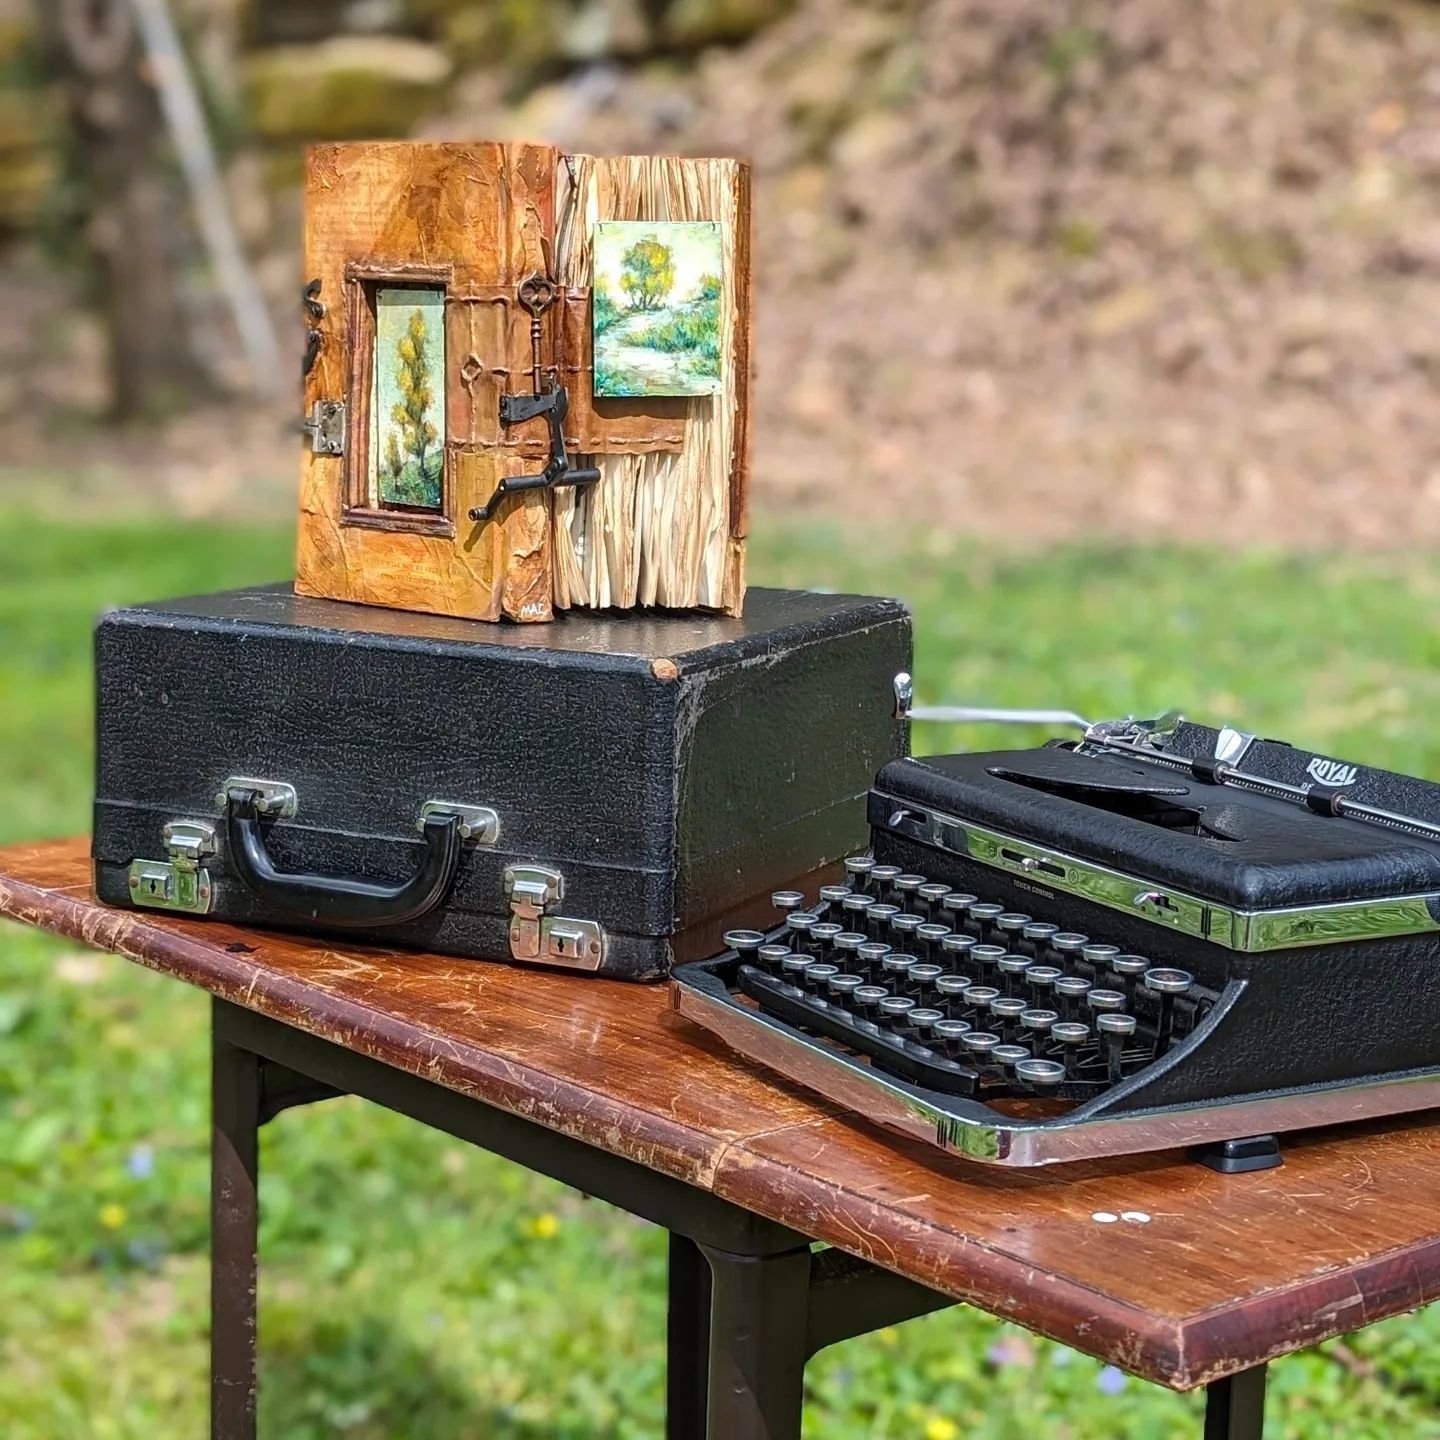 *all Typewriter parts used in this installation were ethically sourced*

I've known the artist that made these really beautiful pieces for a long time. 
Since I was... Geez
12?
These cool assemblage pieces combine two.of my favorite things- the writt